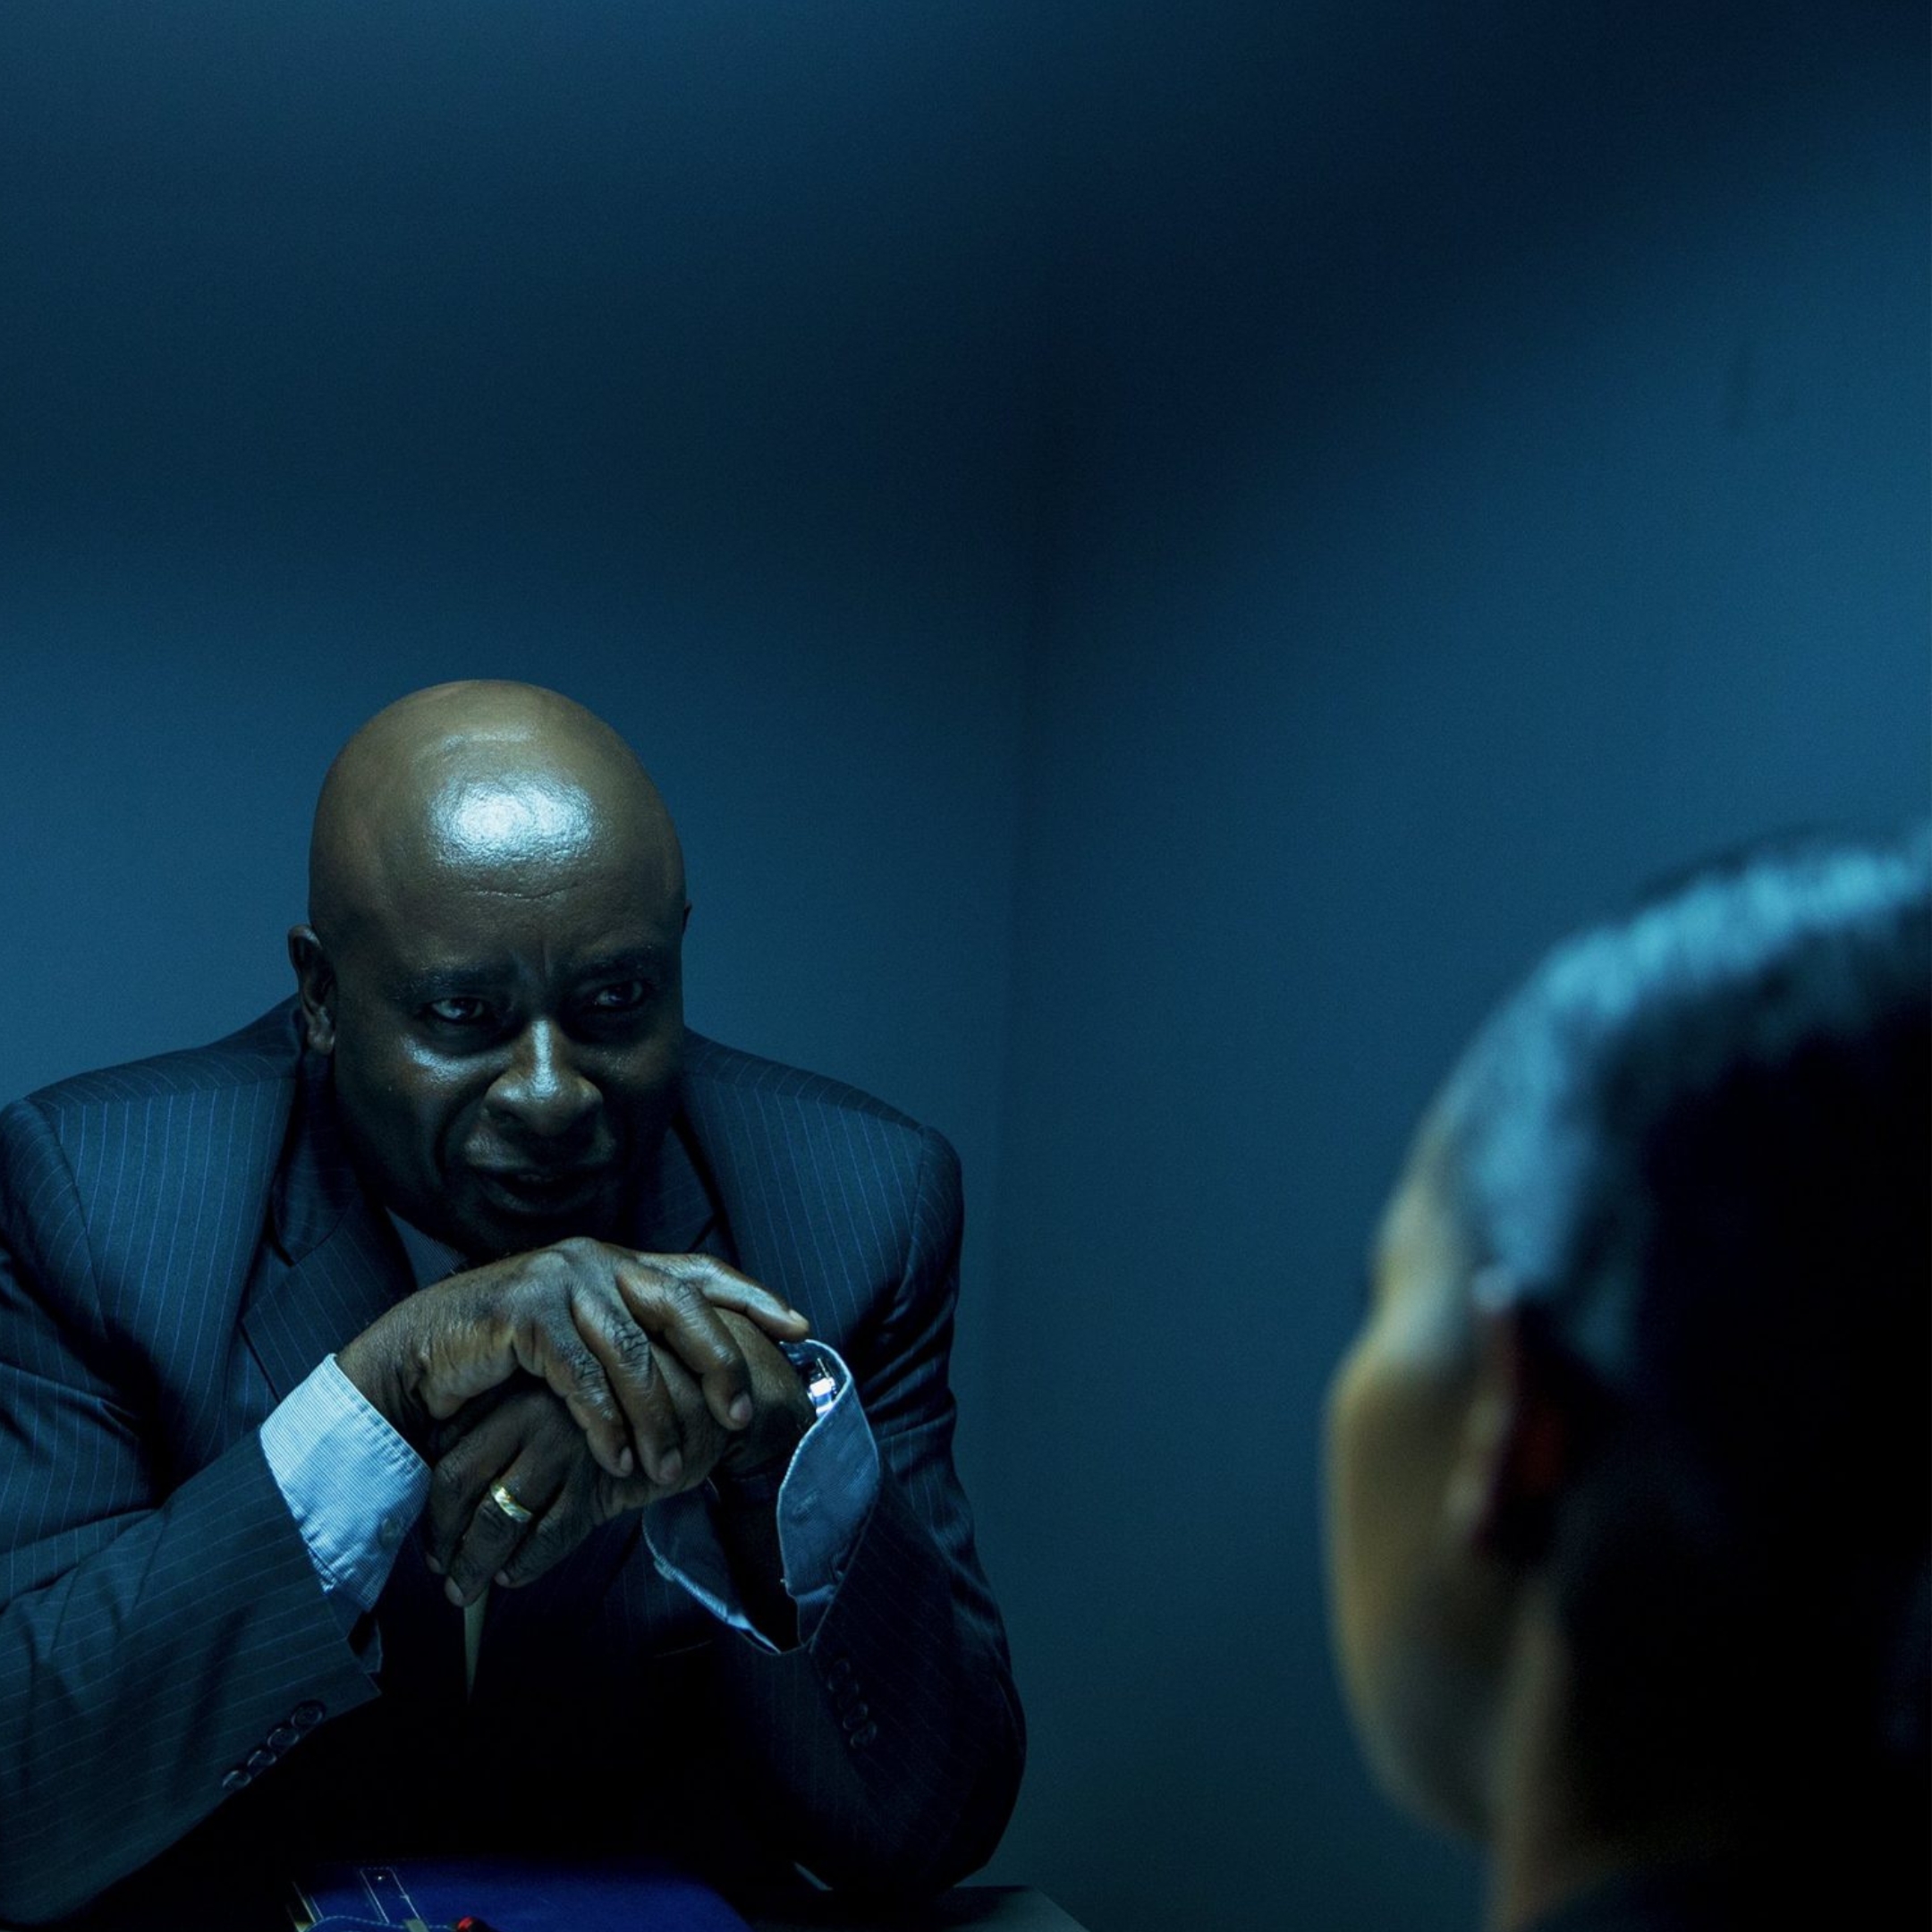 Two people in an interrogation room, a common thing in Nollywood crime films